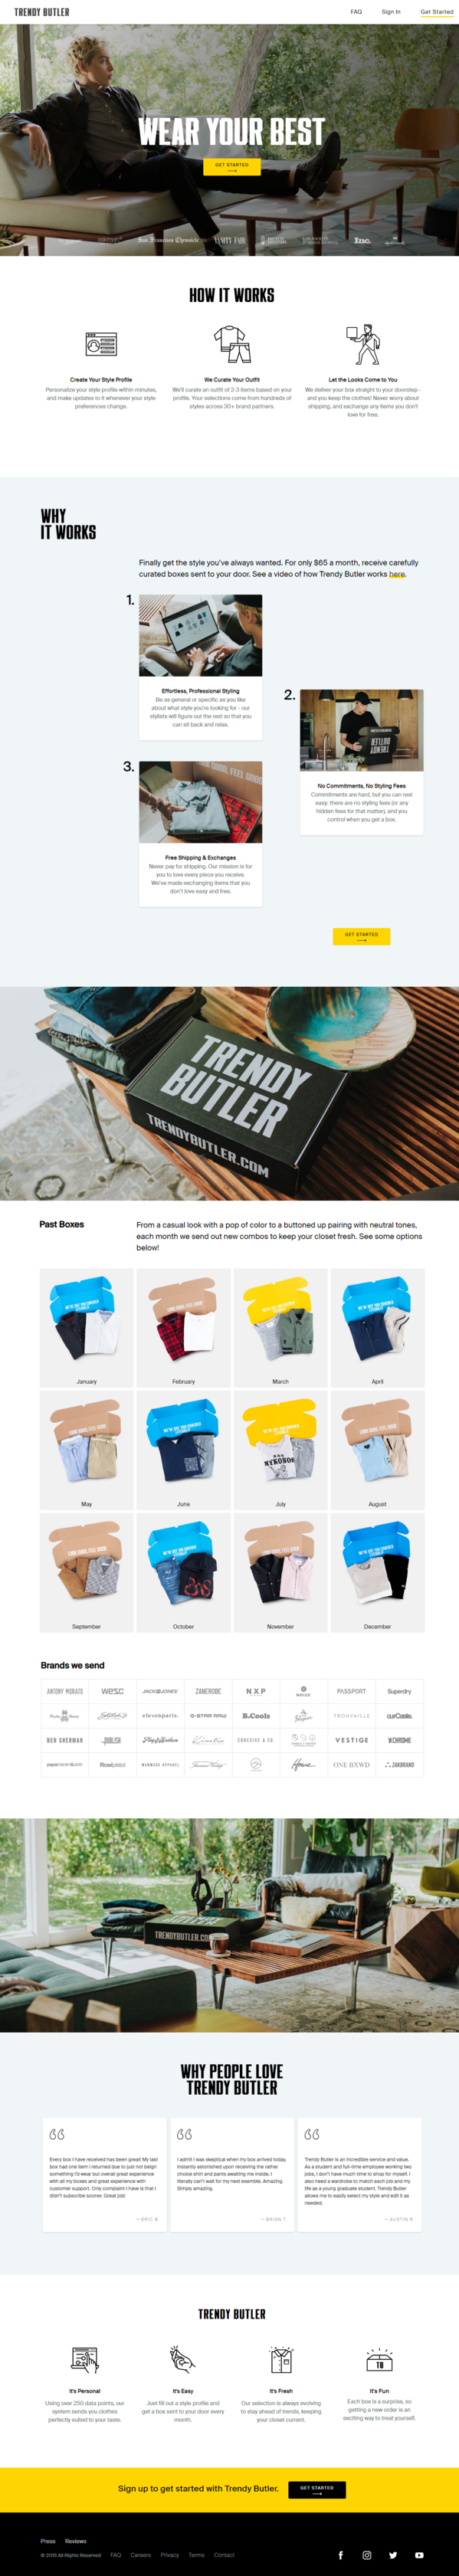 Trendy Butler - Personal Stylist and Clothing Subscription for Men.png